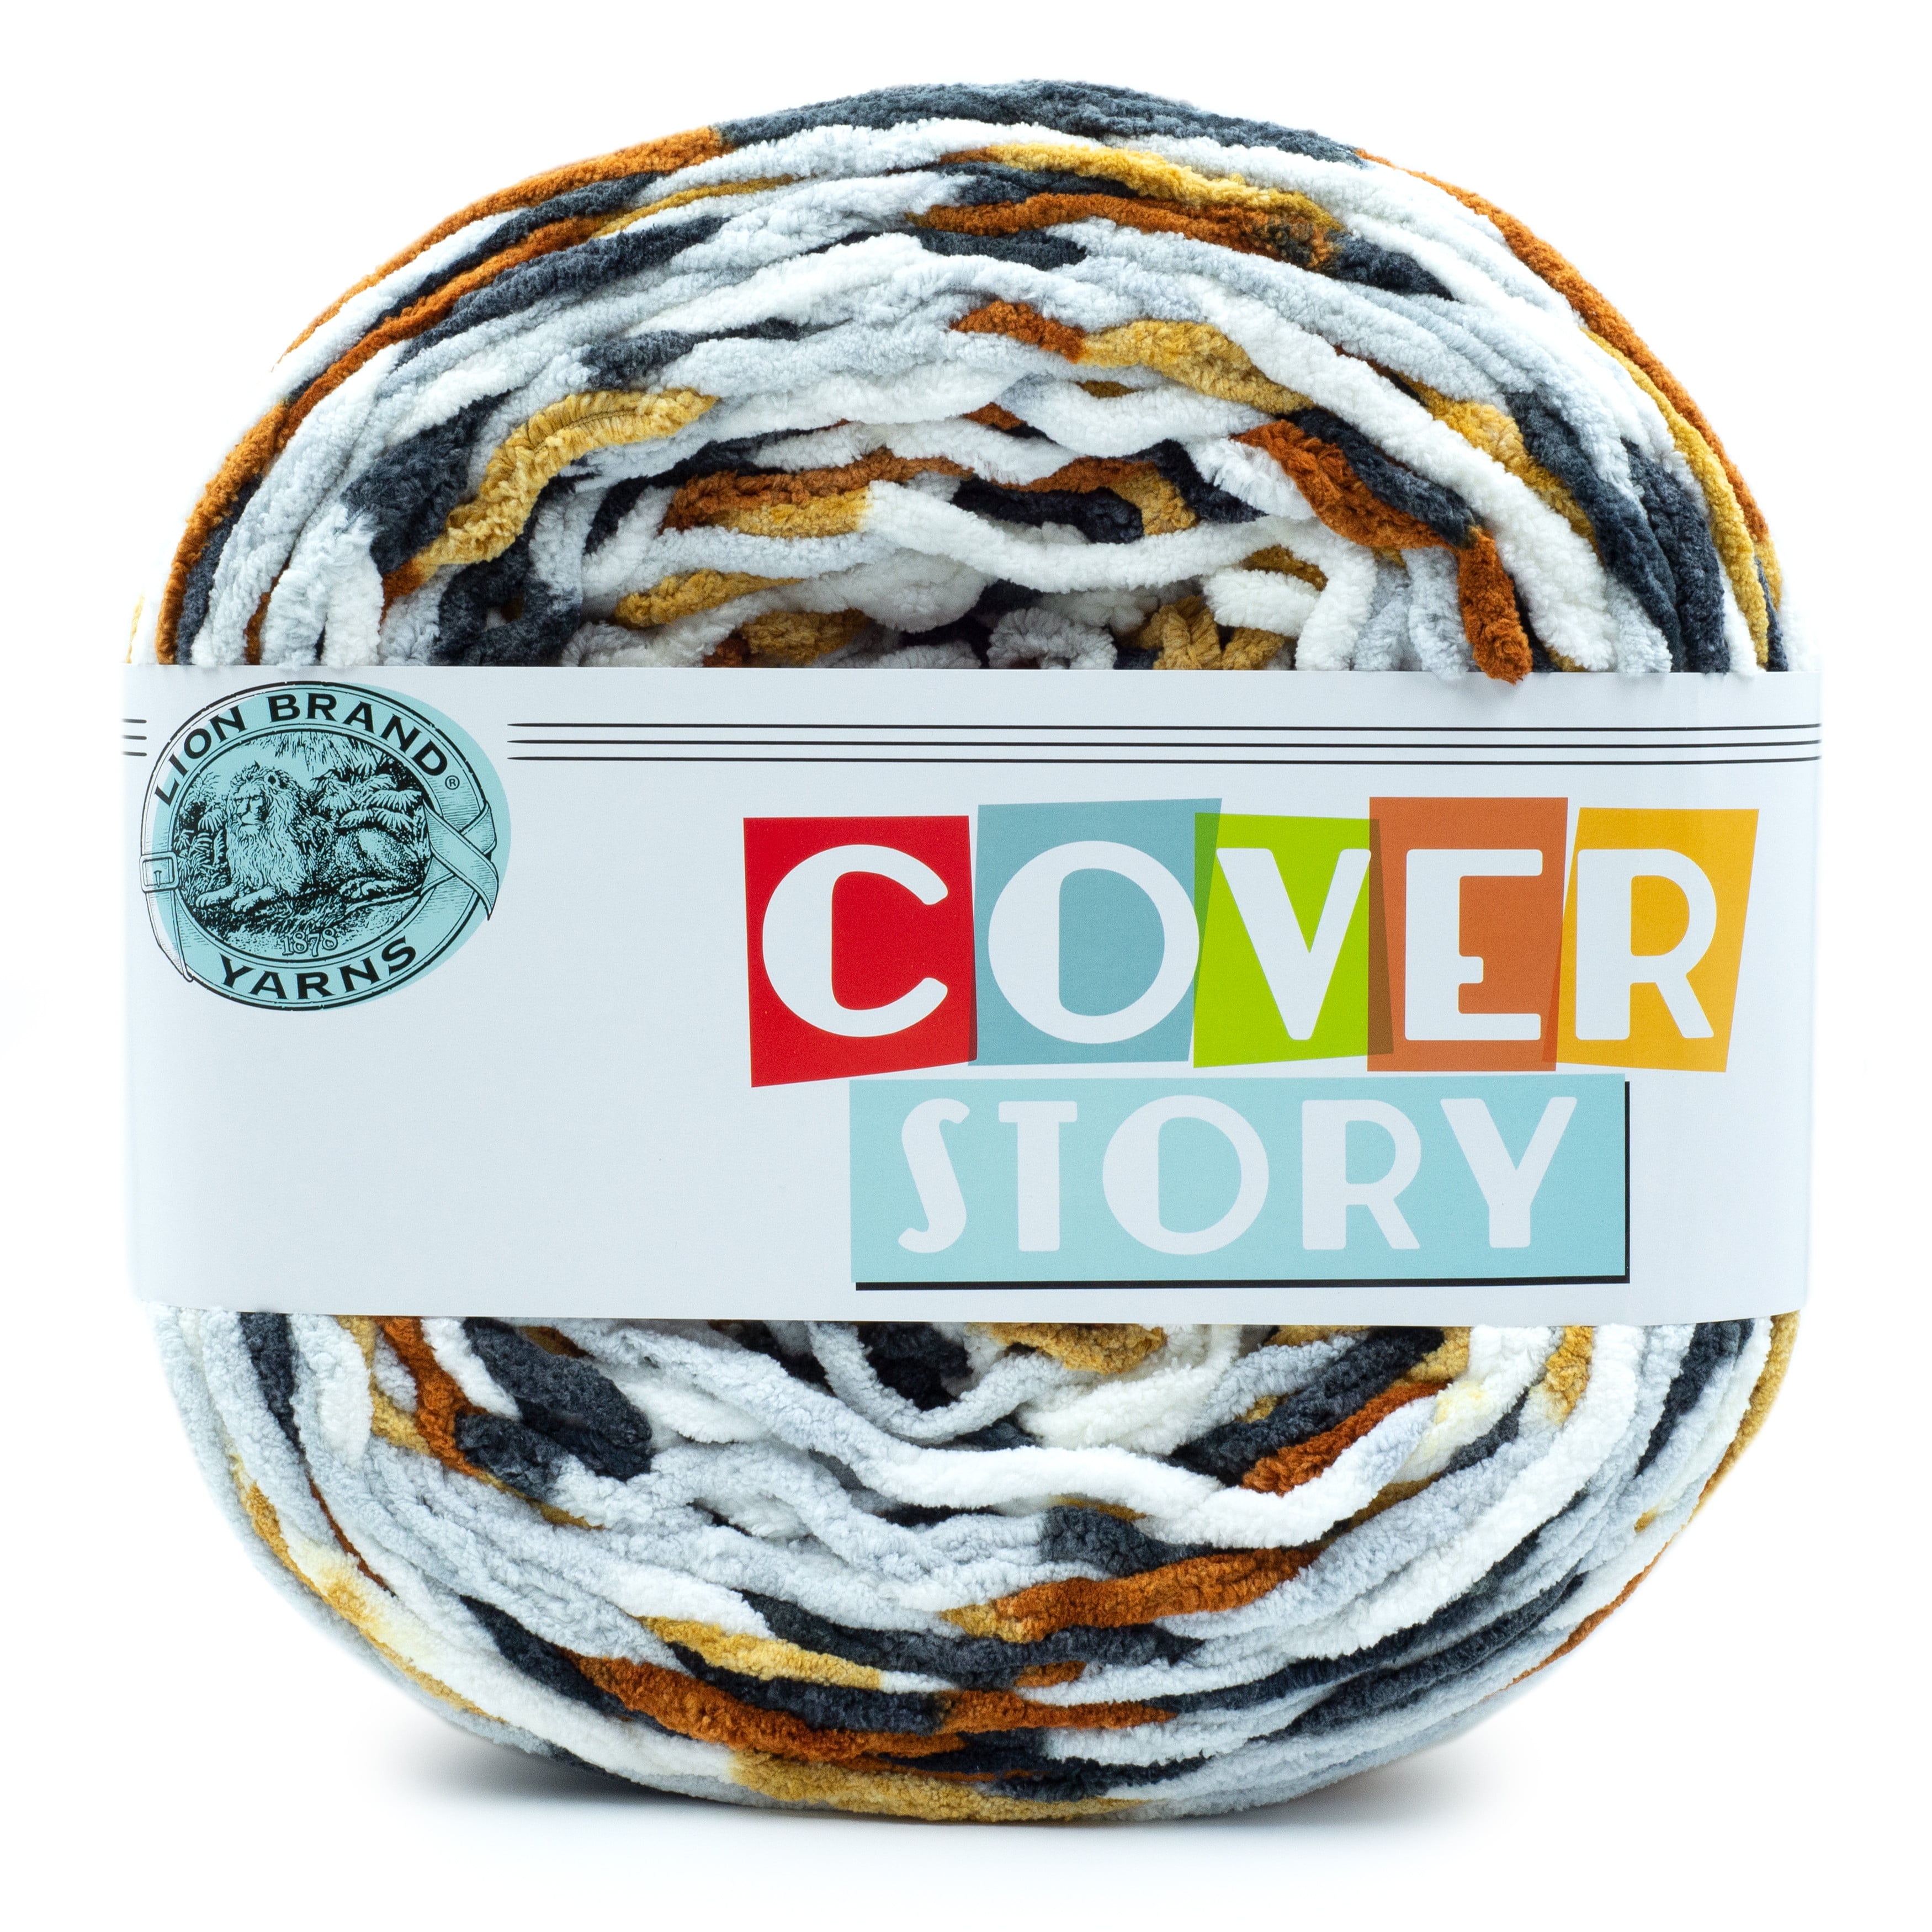 Lion Brand Yarn Cover Story Oro 1 Ball Chenille Afghan Super Bulky  Polyester Multi-color Yarn